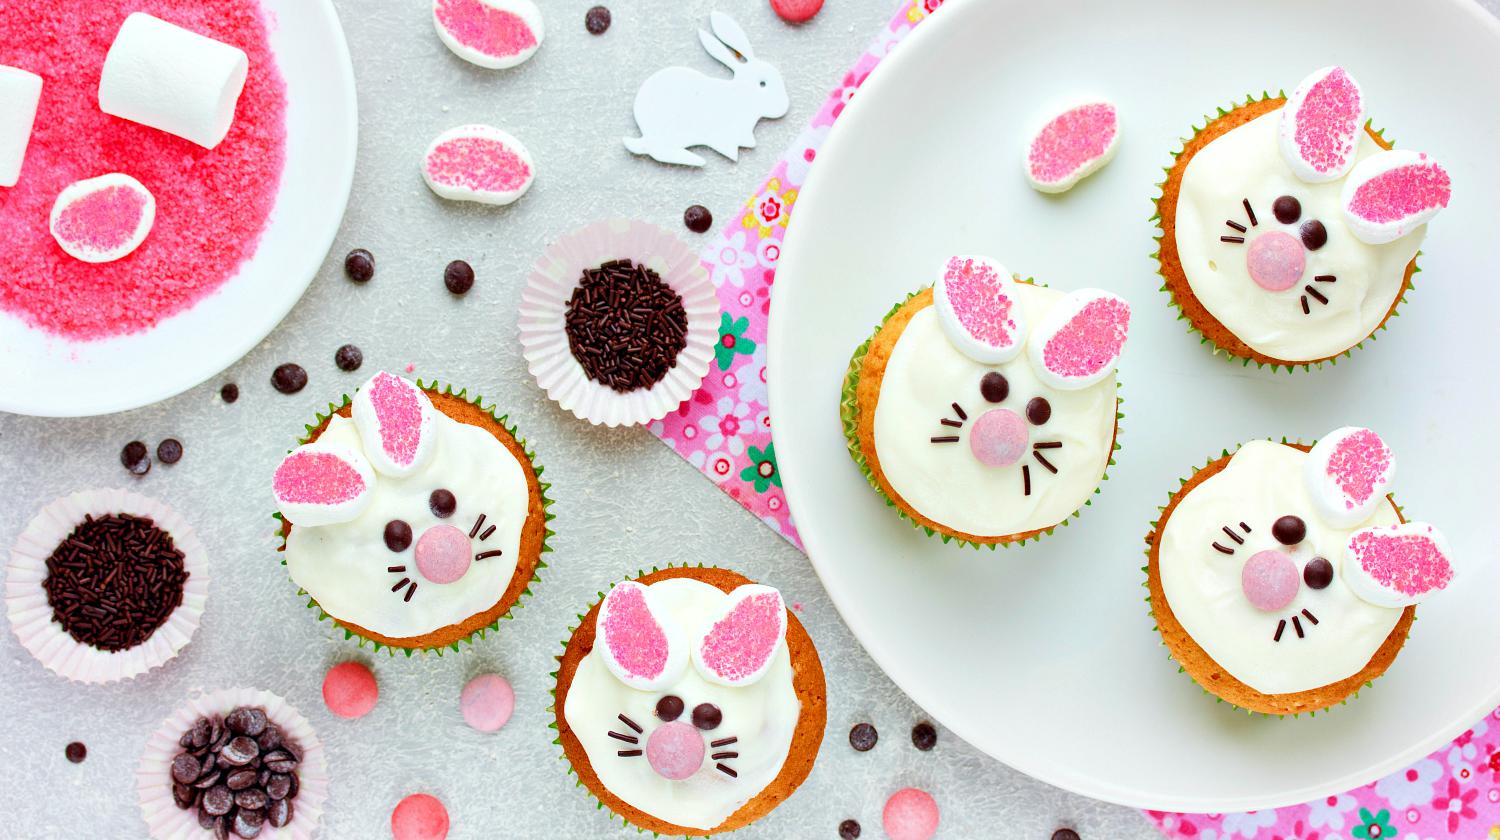 Feature | Easter bunny cupcakes | Easter Desserts Recipes To Make This Year | DIY Projects